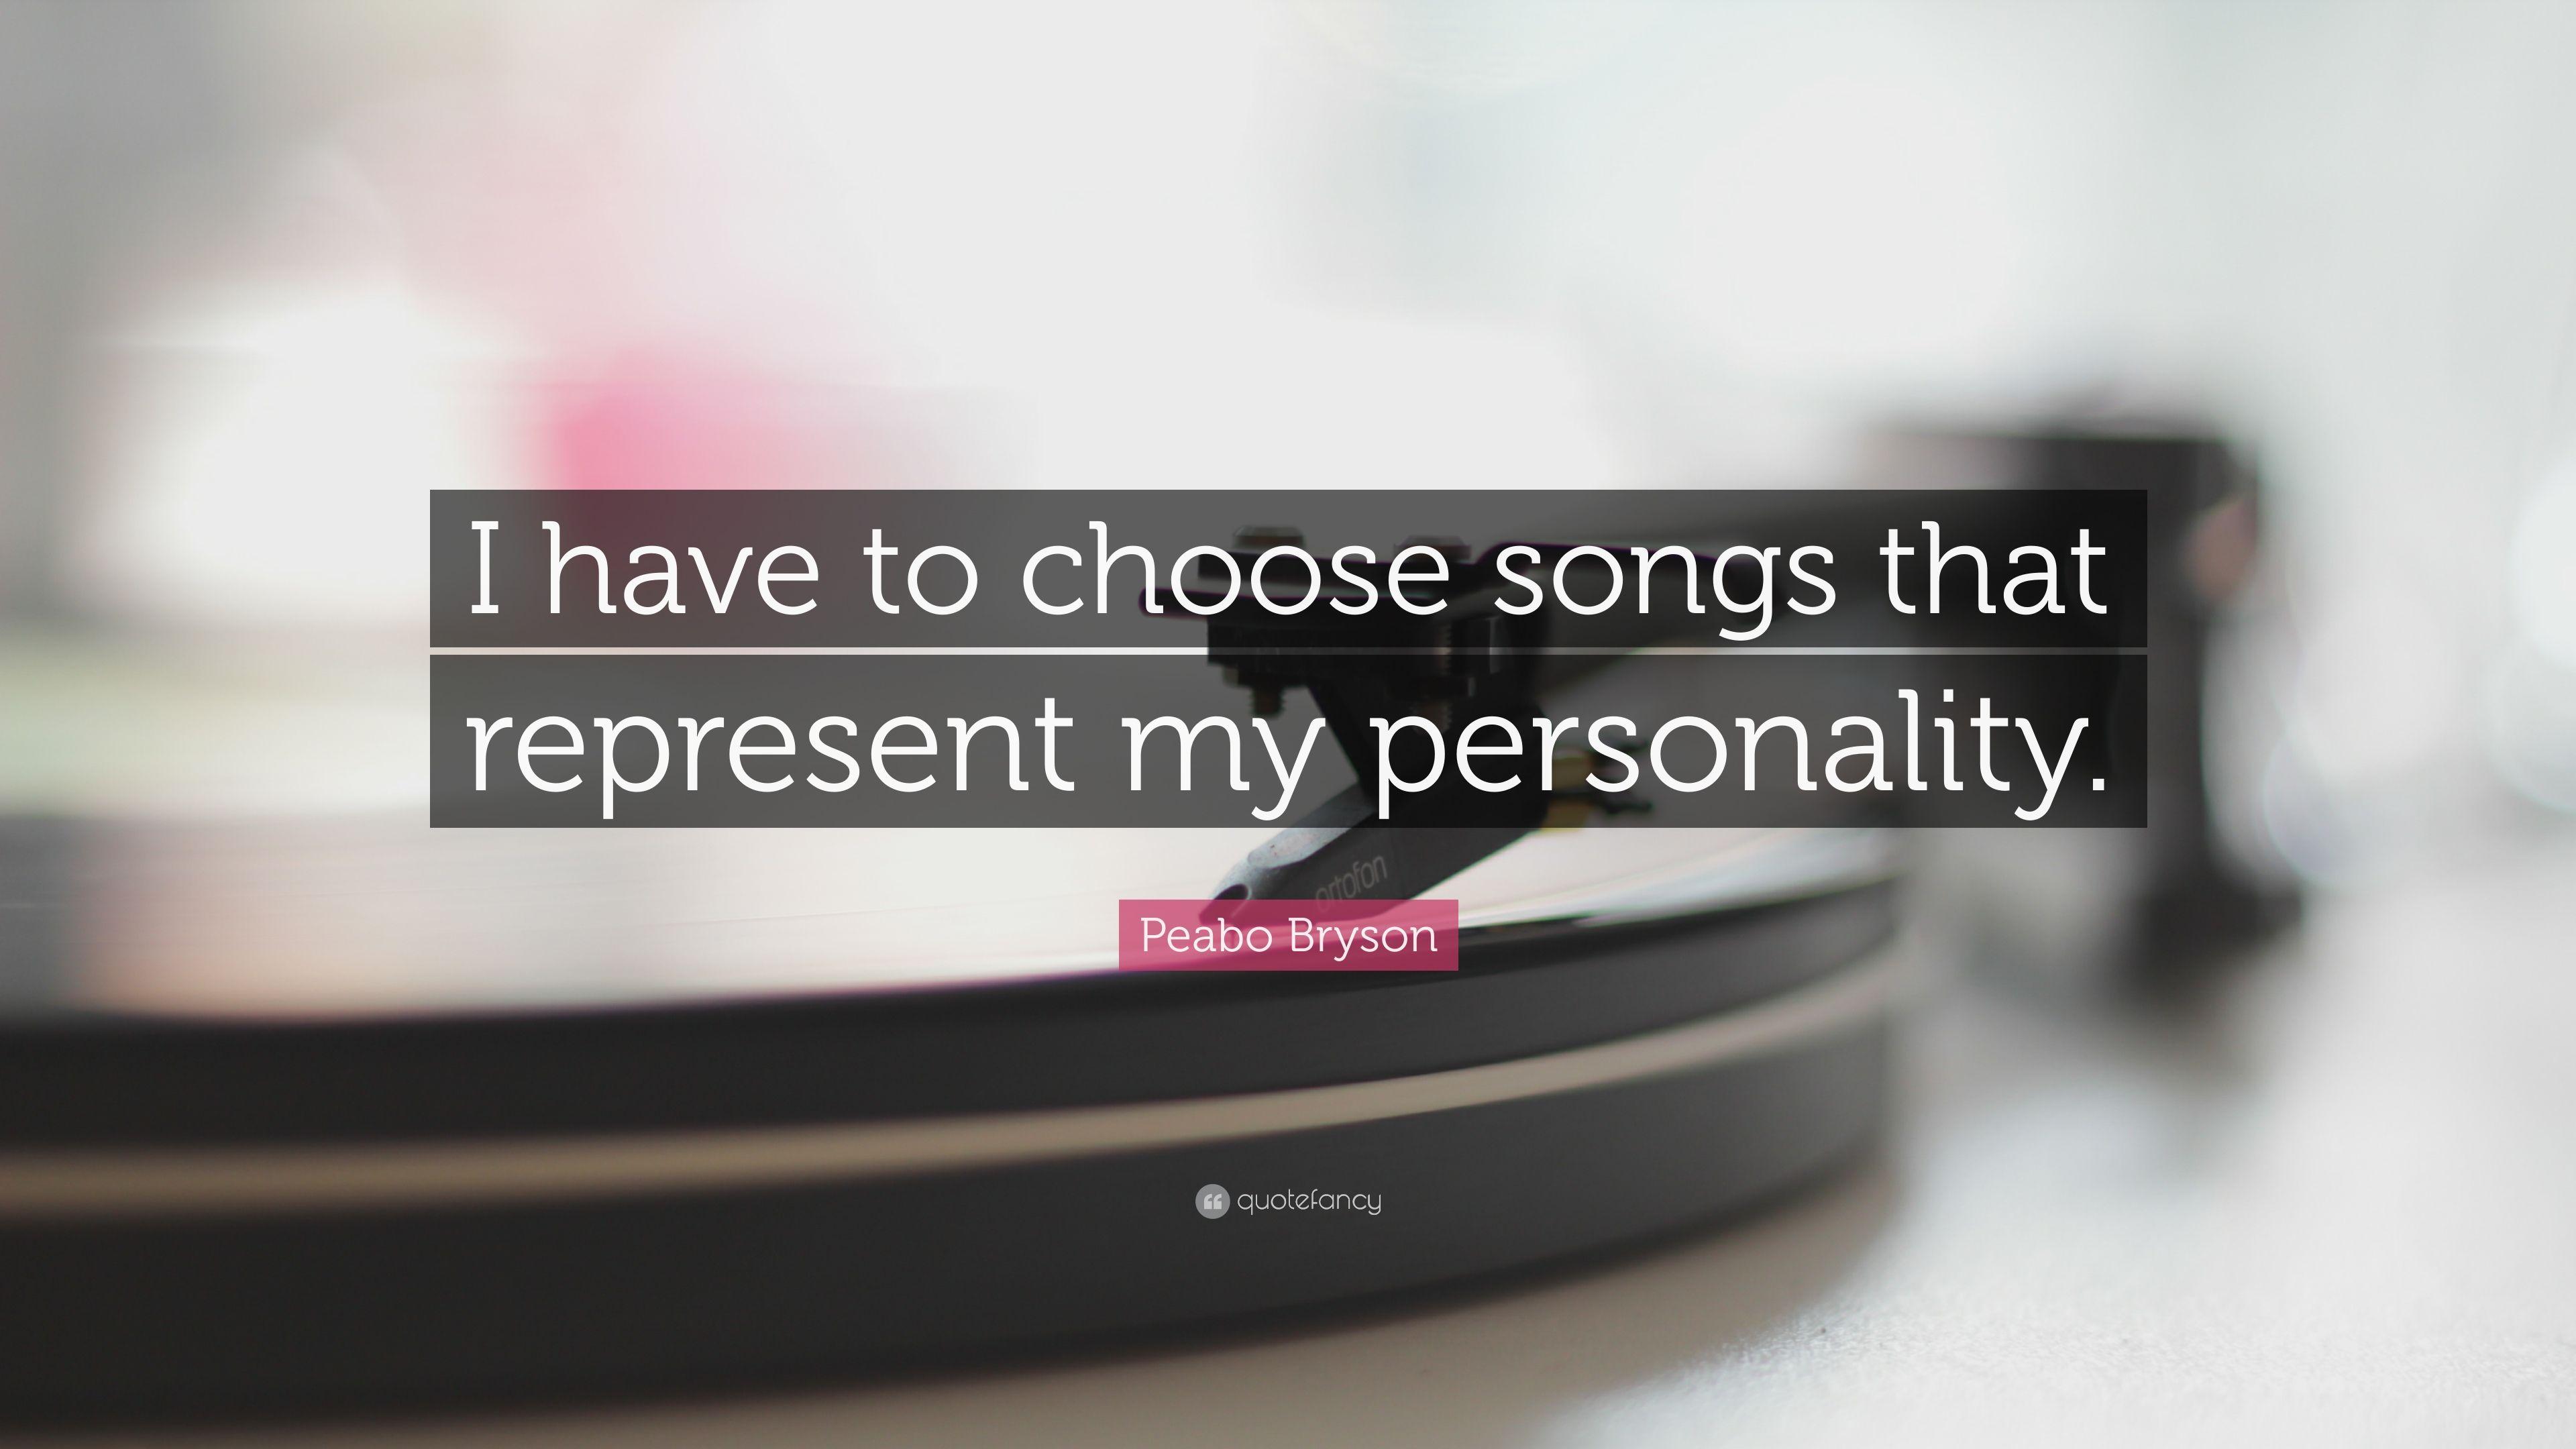 Peabo Bryson Quote: “I have to choose songs that represent my